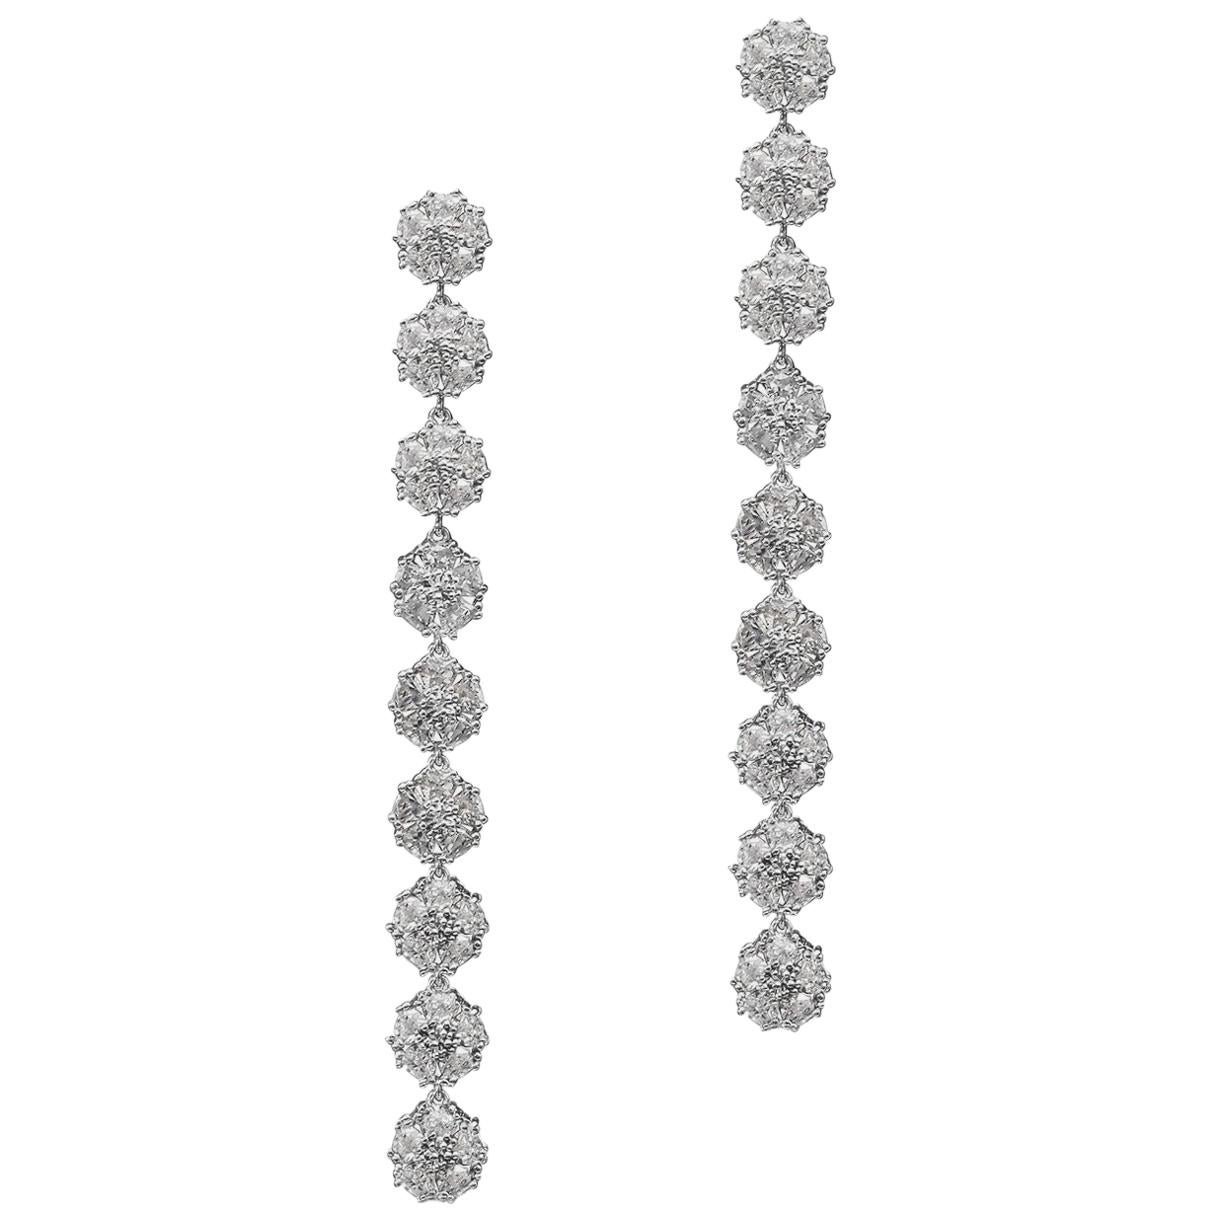 Blossom Gentile Ombre Chandelier Earrings, White and Yellow Gemstones For Sale 1